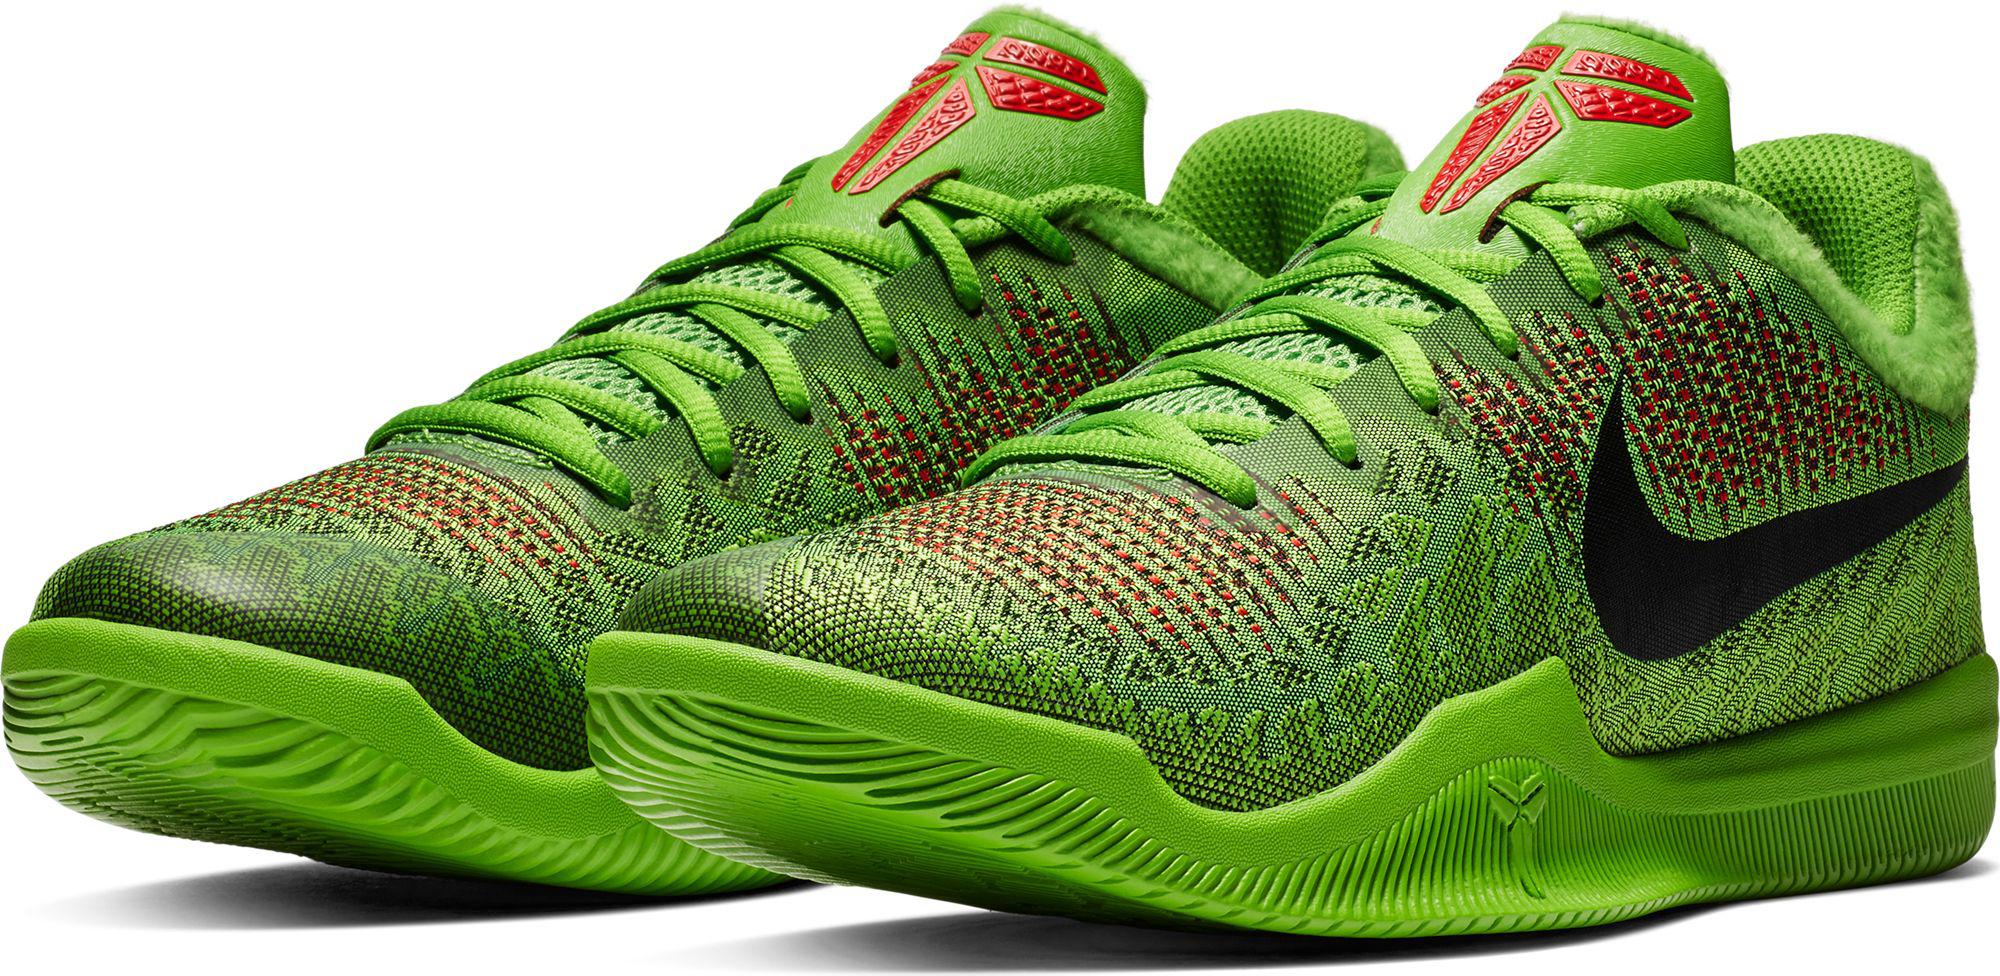 Nike Mamba Rage Basketball Shoes in Green/Black (Green) for Men | Lyst